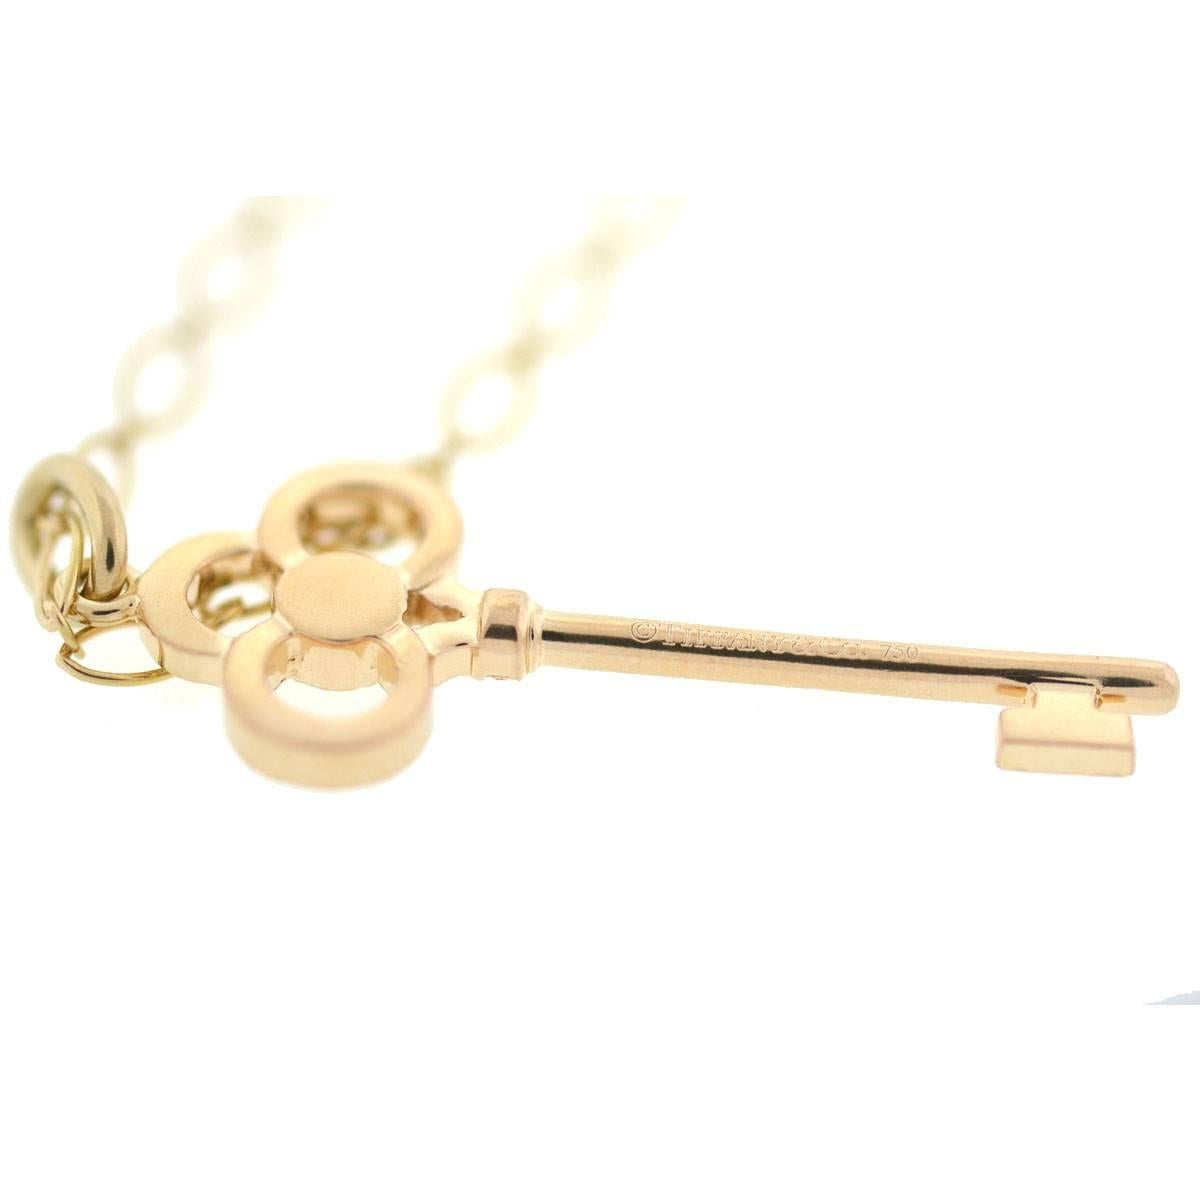 Company-Tiffany & Co
Style-Diamond Crown Key Pendant Necklace
Metal-18k Rose Gold
Chain Length- 18k Yellow Gold Necklace -18.5